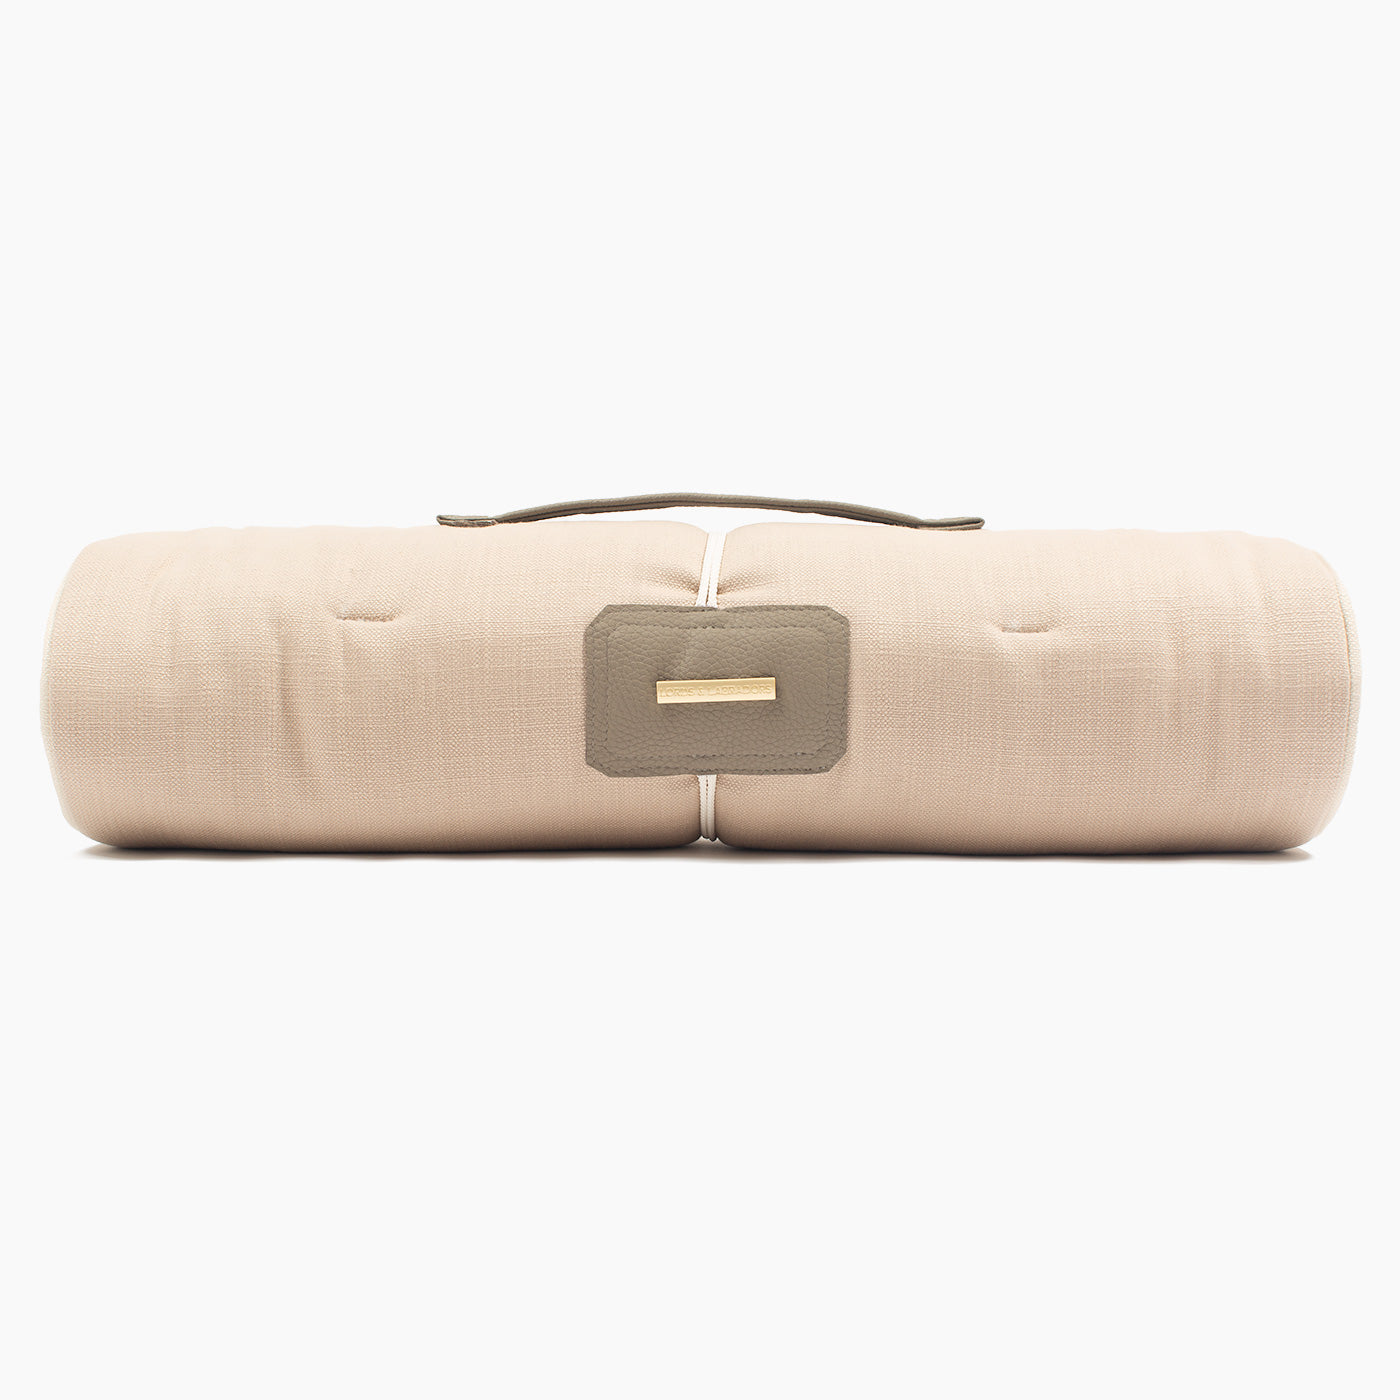 Embark on the perfect pet travel with our luxury Travel Mat in Savanna Oatmeal! Featuring a Carry handle for on the move once Rolled up for easy storage, can be used as a seat cover, boot mat or travel bed! Available now at Lords & Labradors US